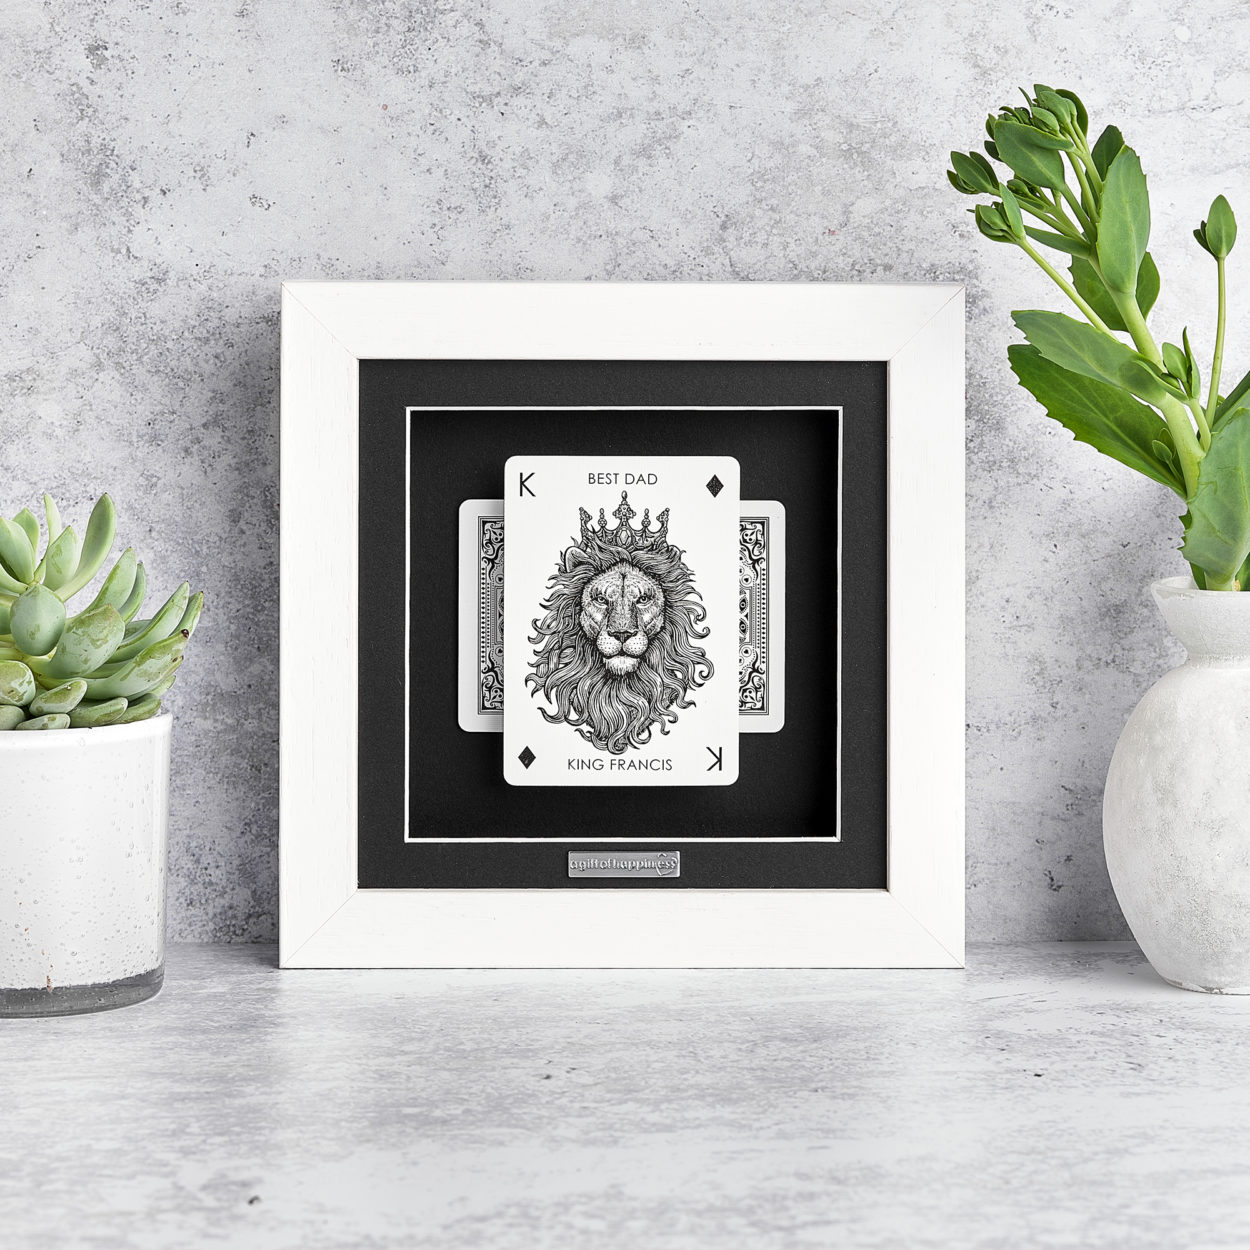 ‘Best’ Family Member Lion Playing Card Frame